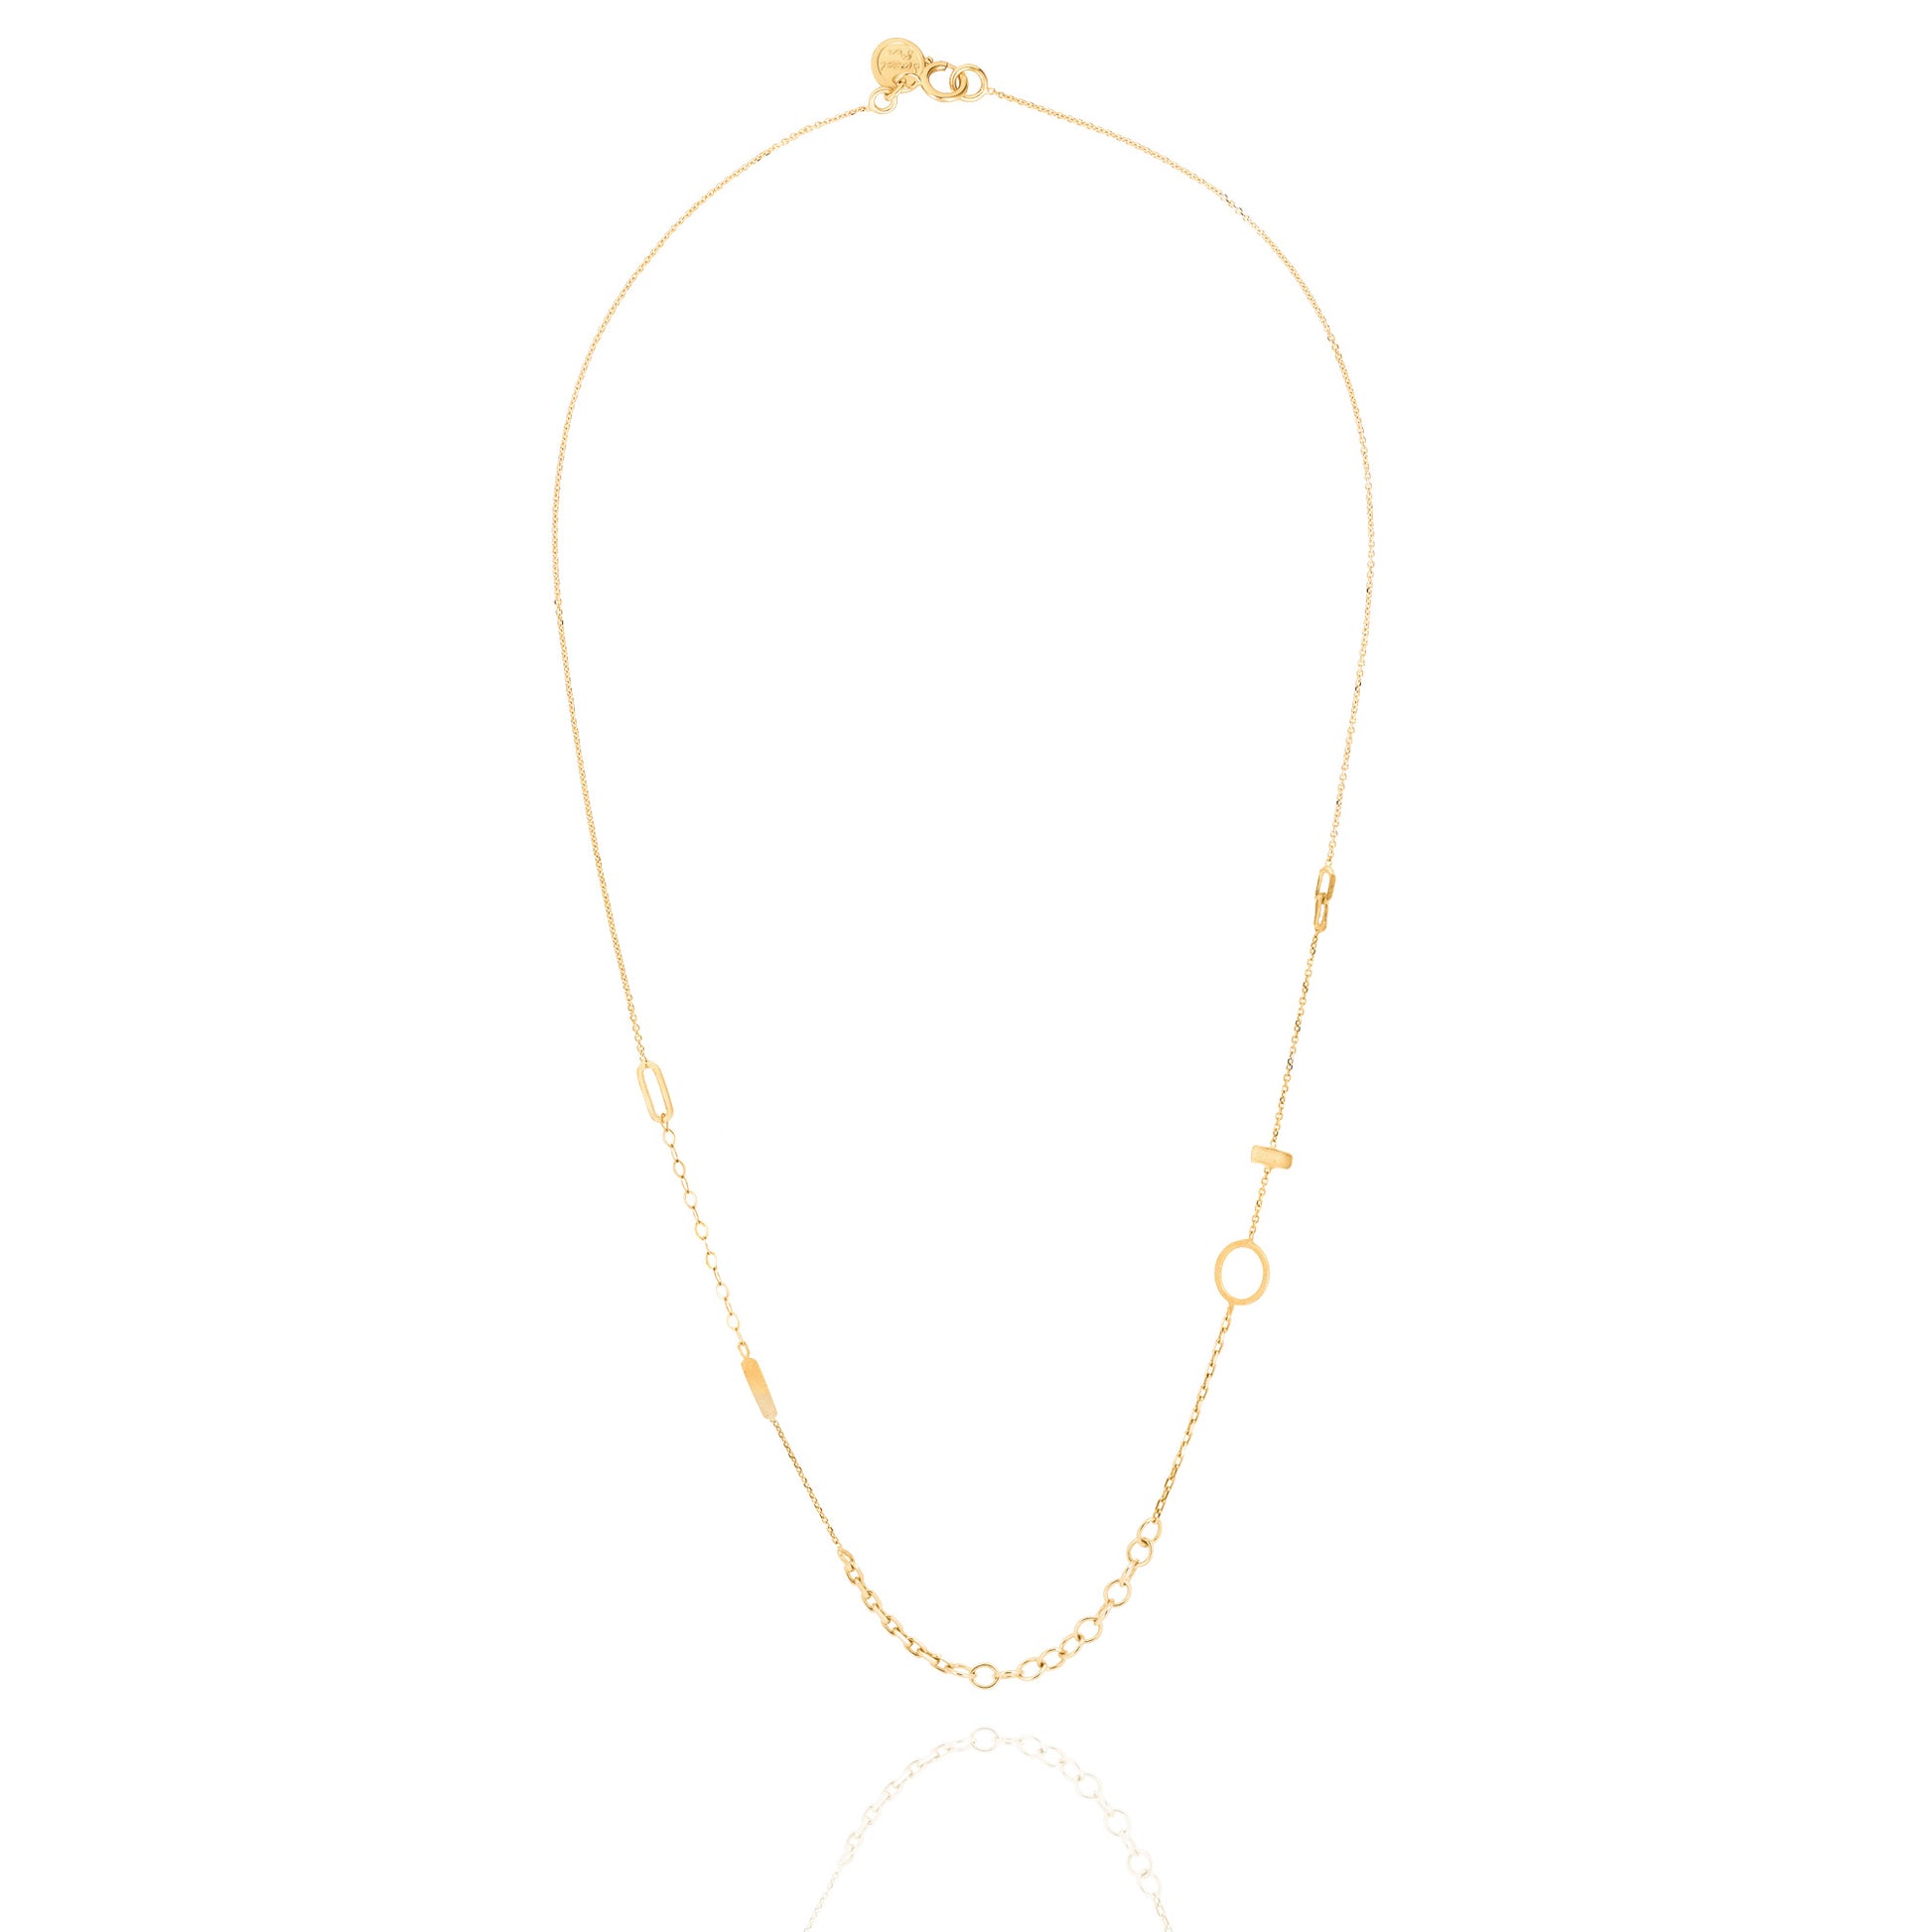 18ct Gold Chains Galore necklace